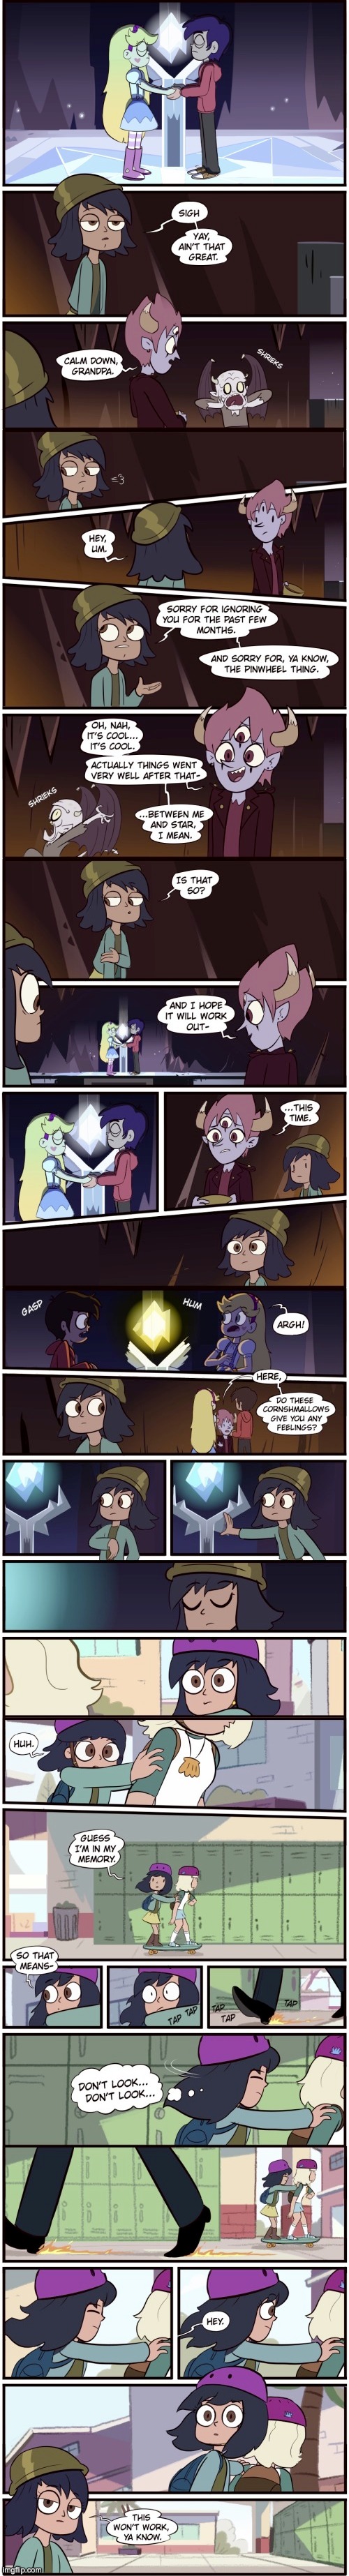 Tom vs Jannanigans: Happily Sever’d After (Part 4) | image tagged in morningmark,comics/cartoons,svtfoe,star vs the forces of evil,comics,memes | made w/ Imgflip meme maker